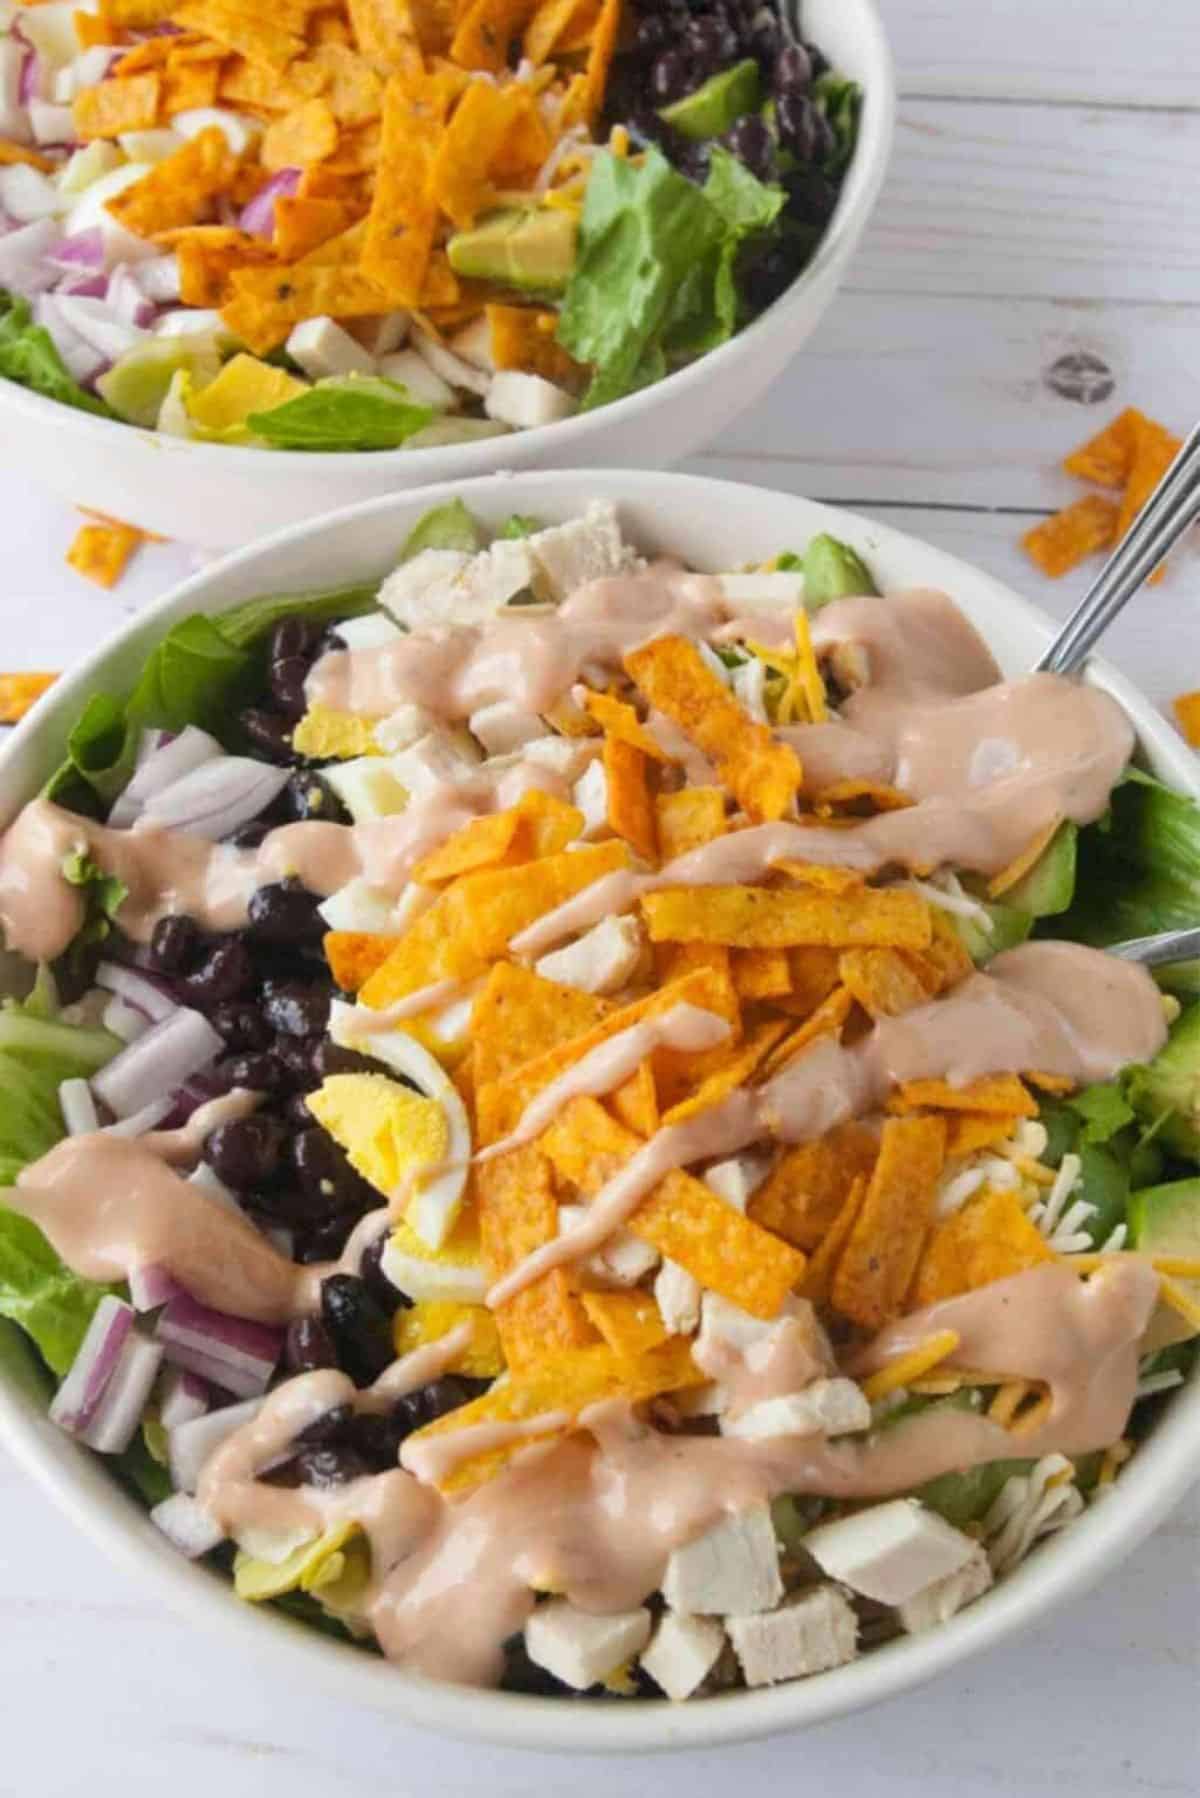 Southern BBQ Chicken Salad with Barbecue Ranch Dressing in a white bowl.